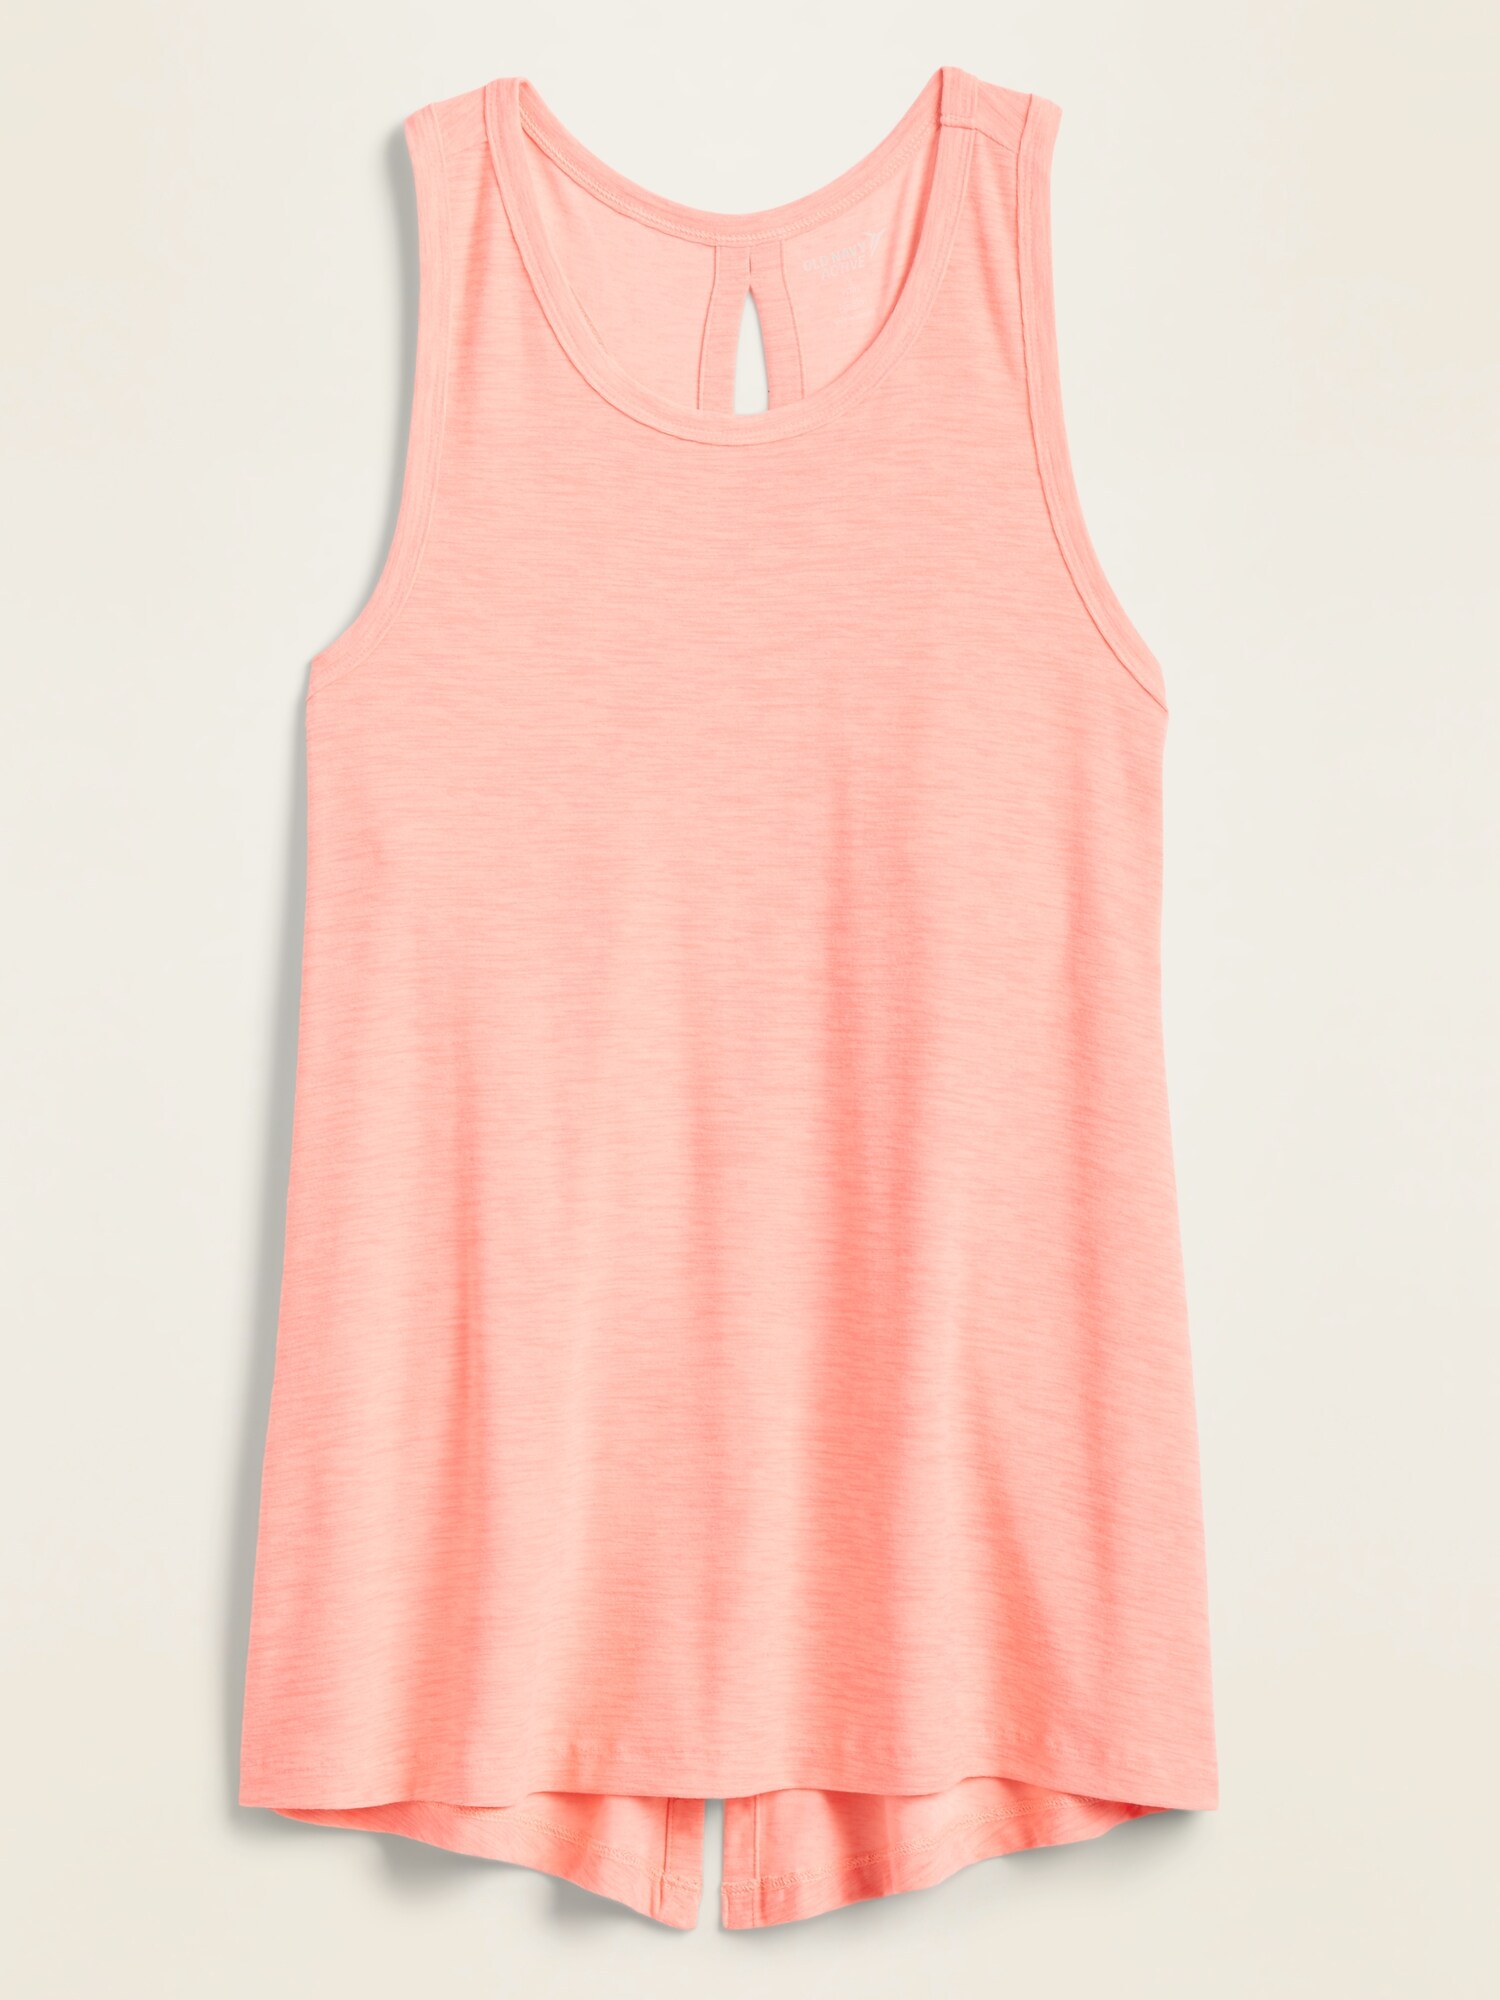 Breathe ON Tie-Back Performance Tank Top for Women